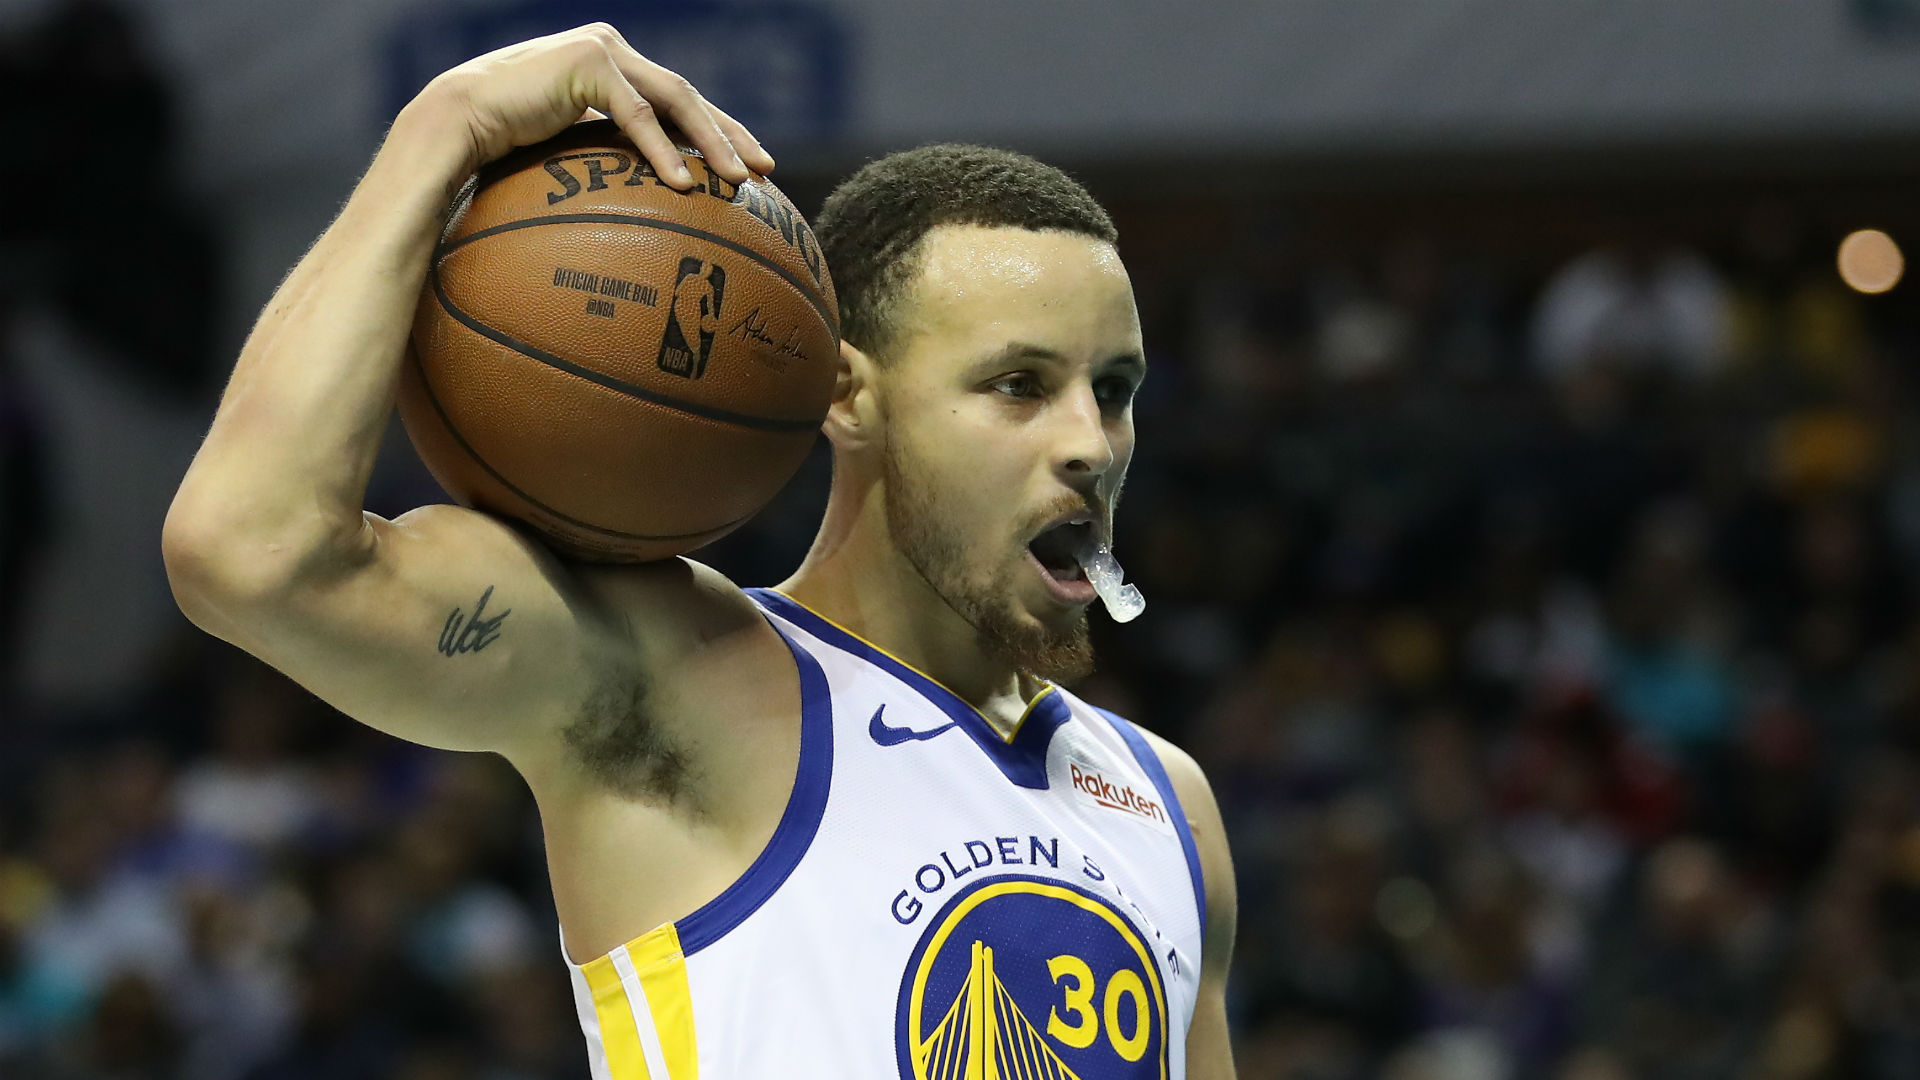 The Golden State Warriors reached 50 wins for a sixth straight season on Sunday, a milestone Stephen Curry felt was significant.